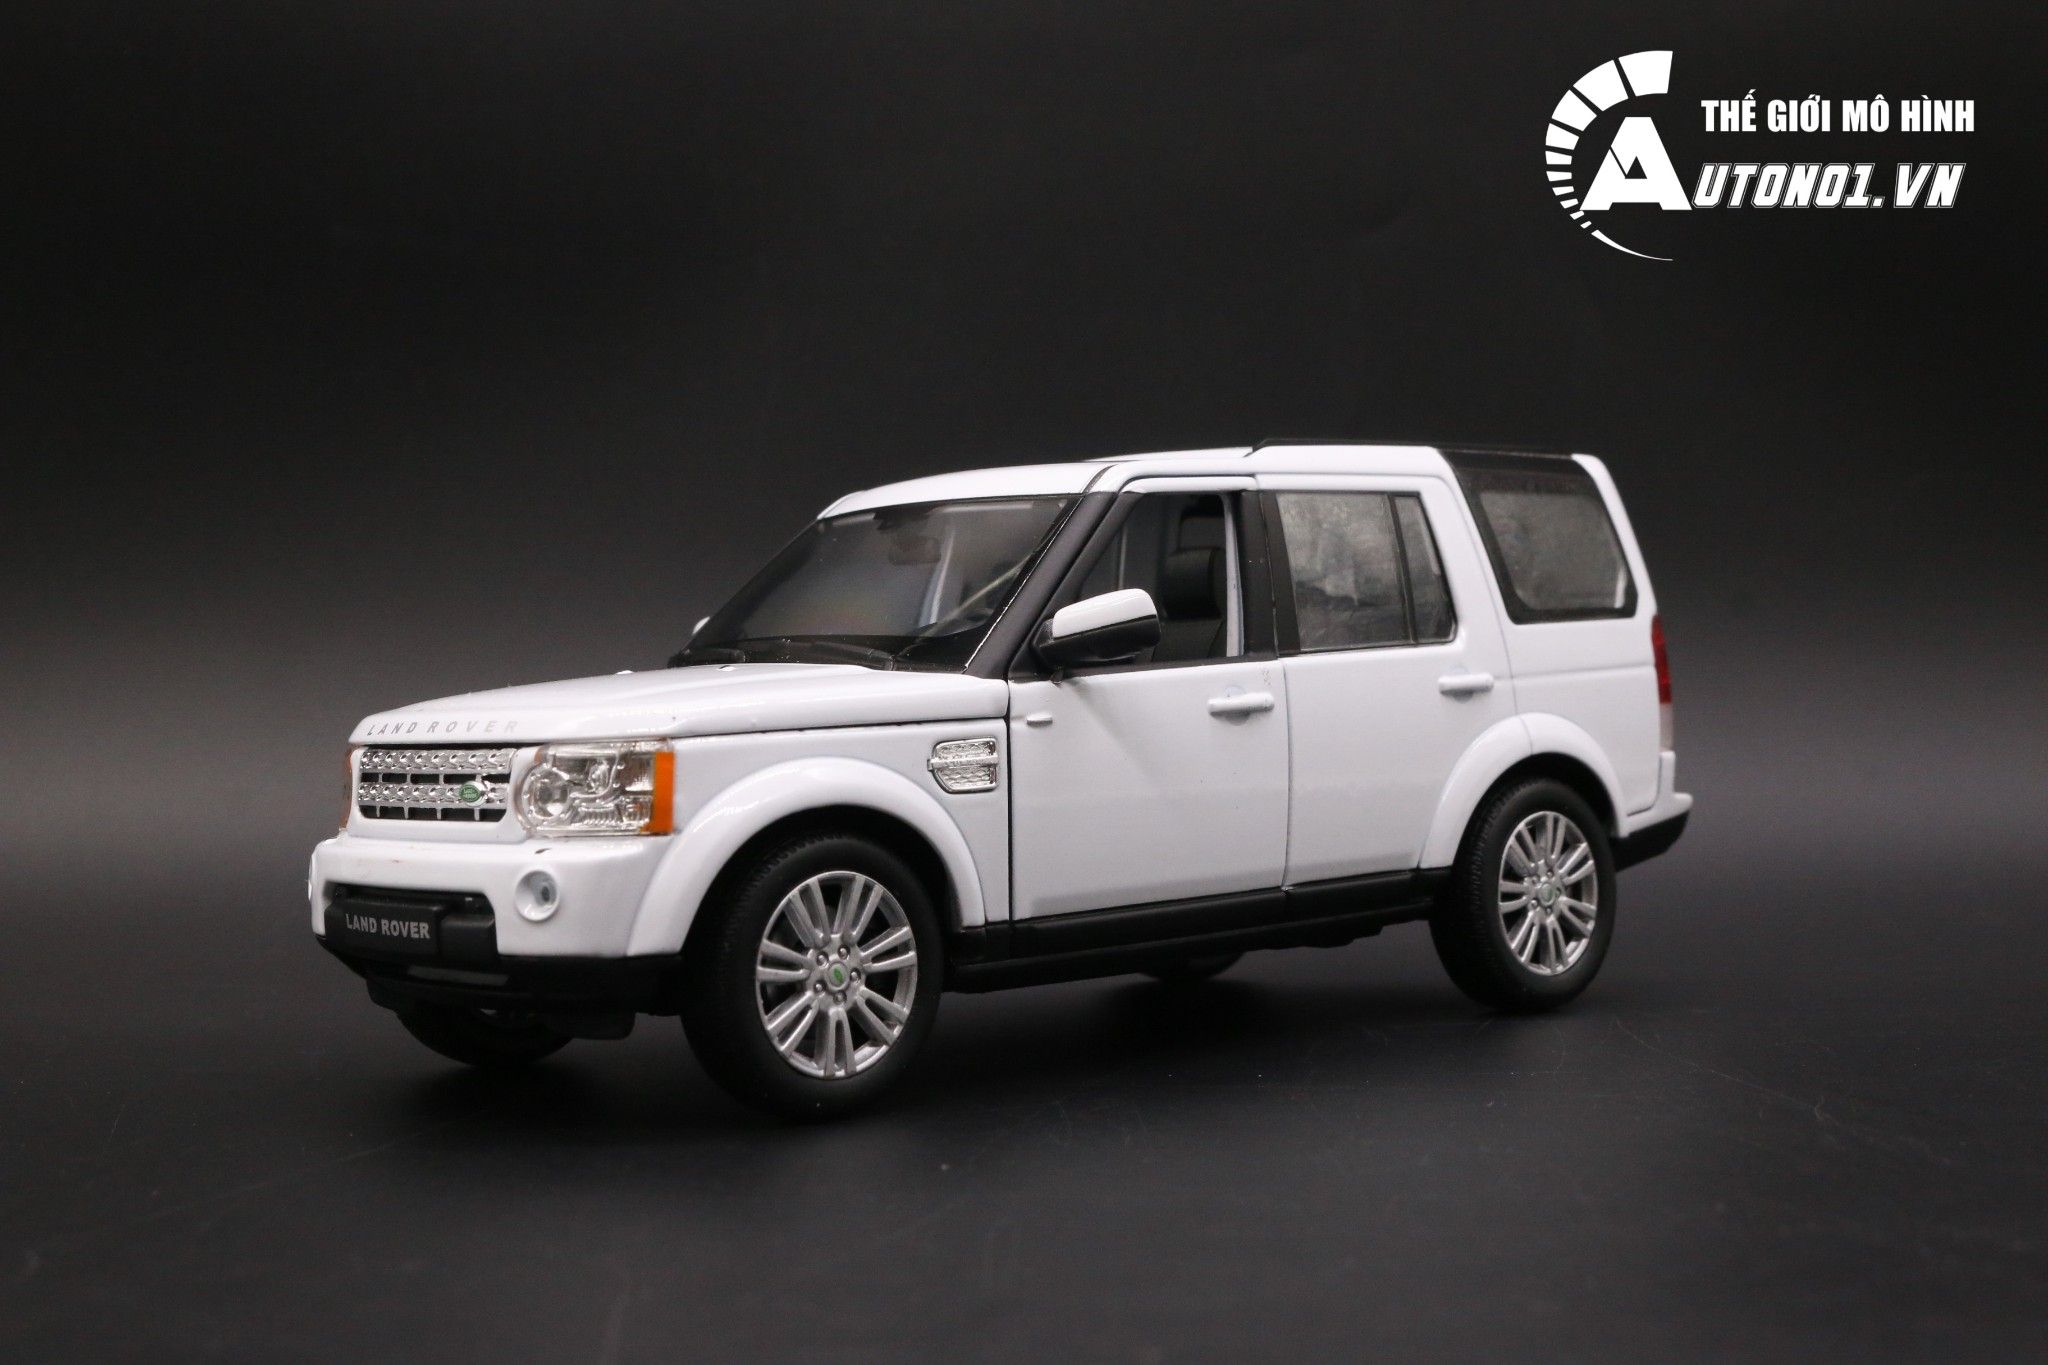 File2012 Land Rover Discovery 4 L319 MY12 TDV6 wagon 20150807 02jpg   Wikimedia Commons